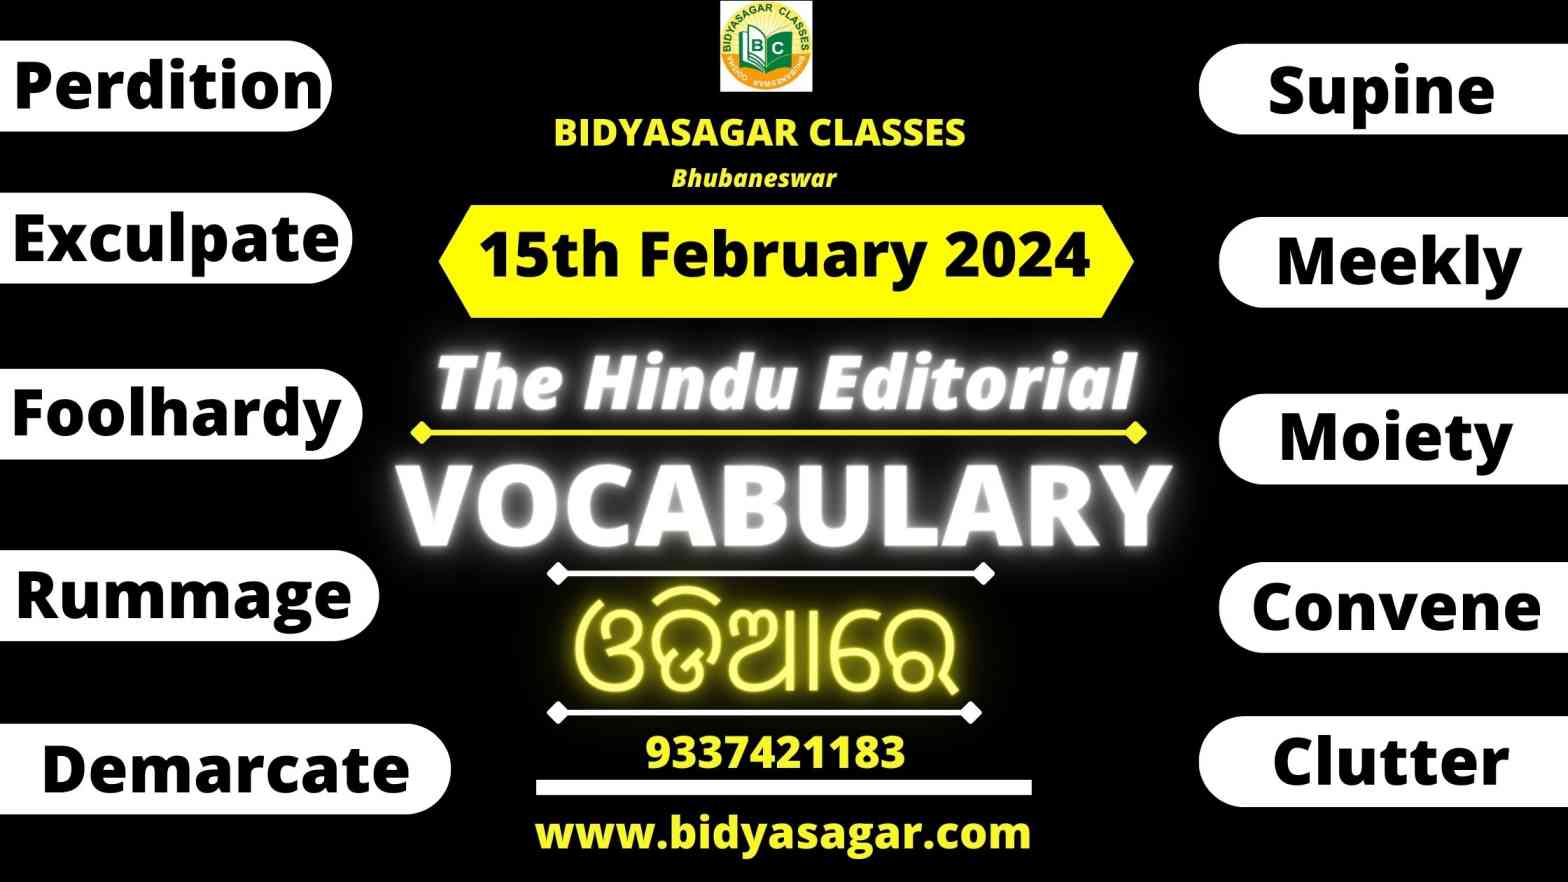 The Hindu Editorial Vocabulary of 15th February 2024